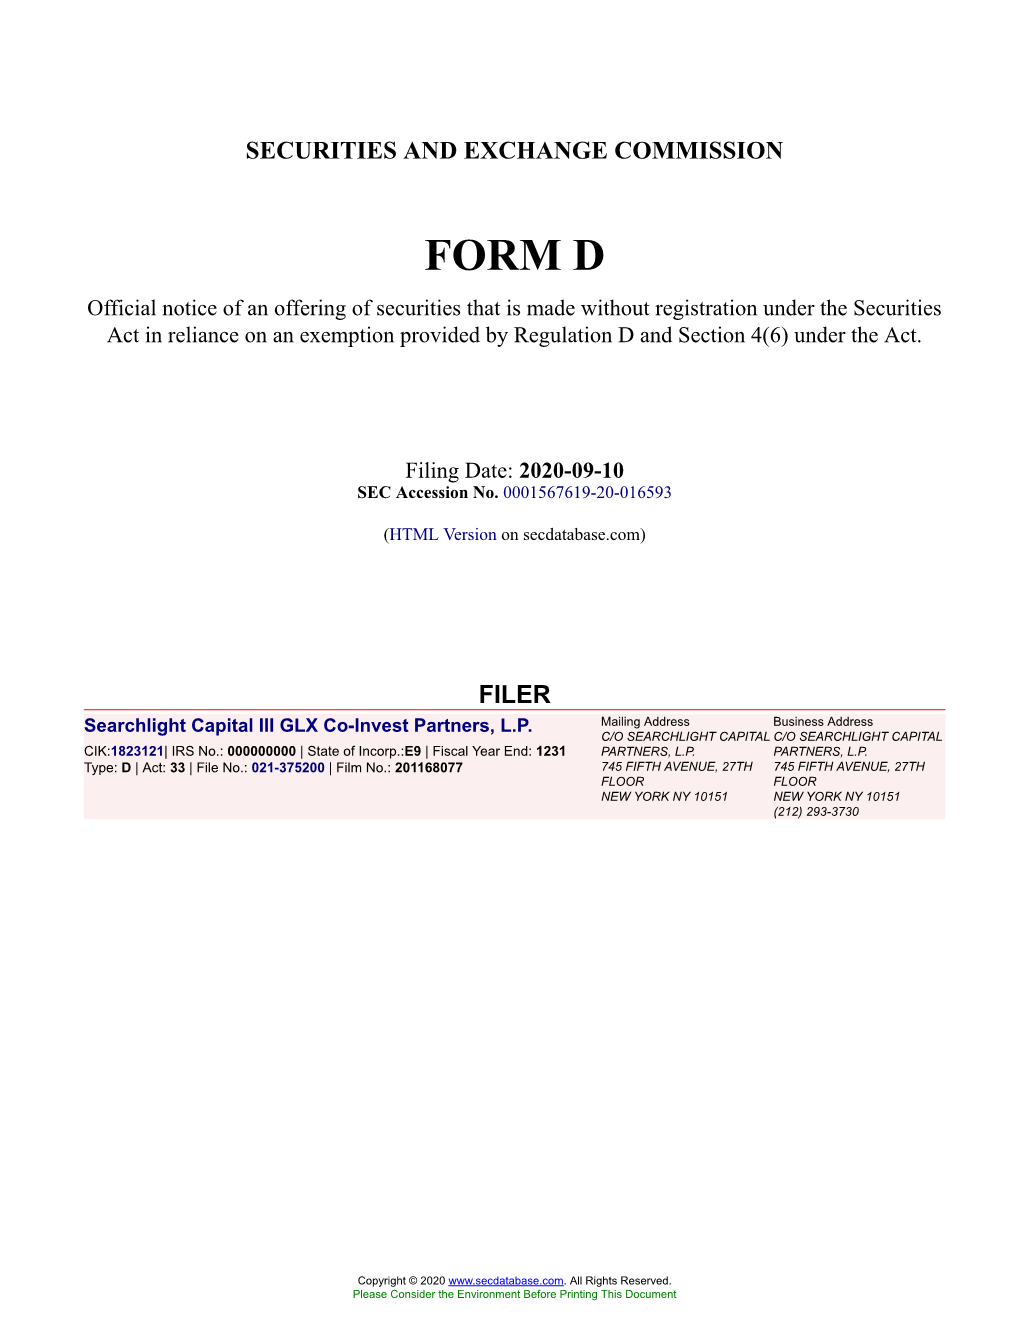 Searchlight Capital III GLX Co-Invest Partners, L.P. Form D Filed 2020-09